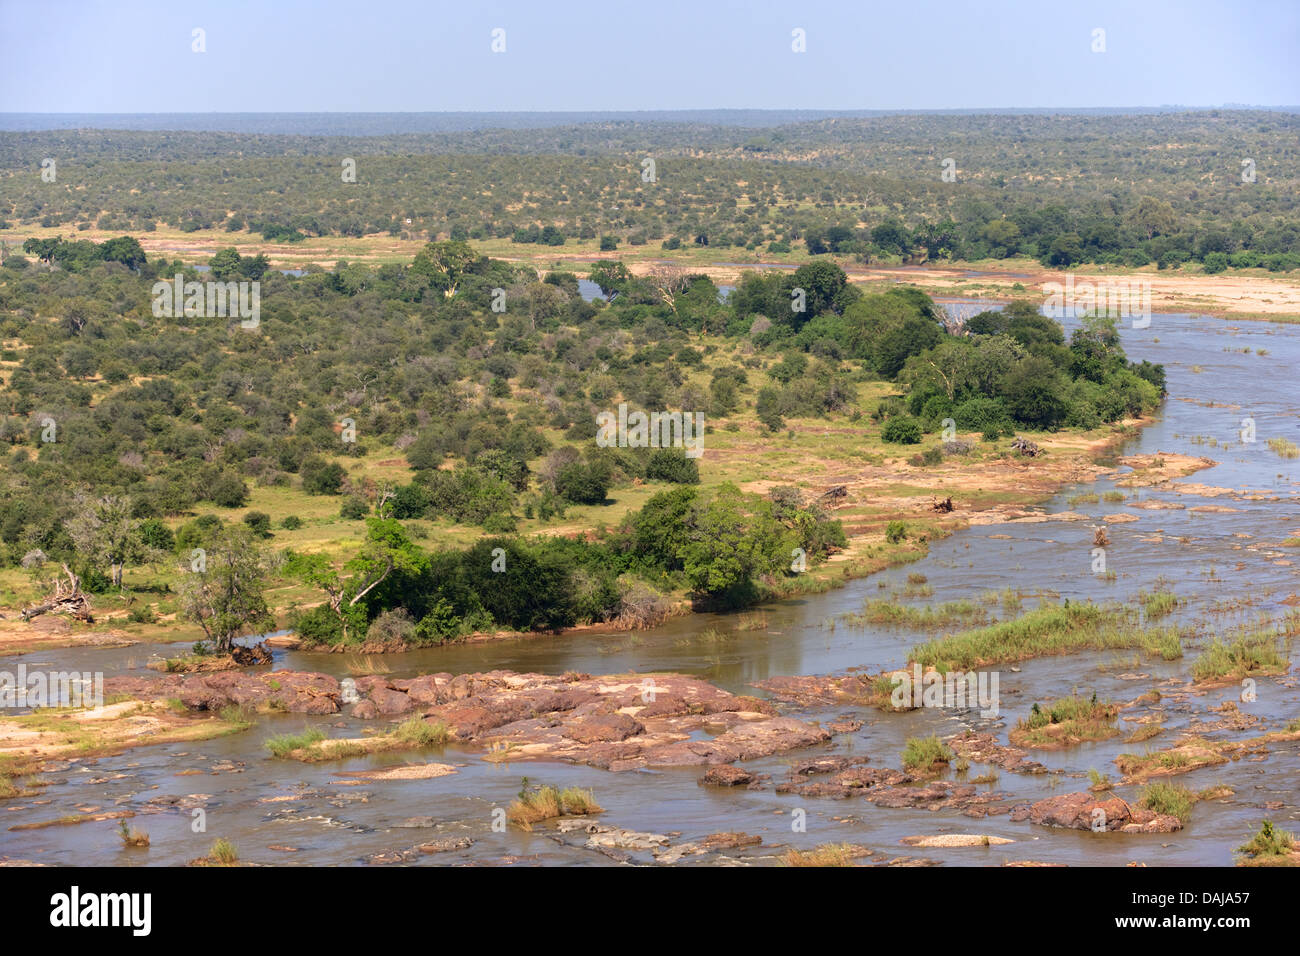 The Olifants River as seen from the Olifants rest camp, Kruger National Park, South Africa. Stock Photo